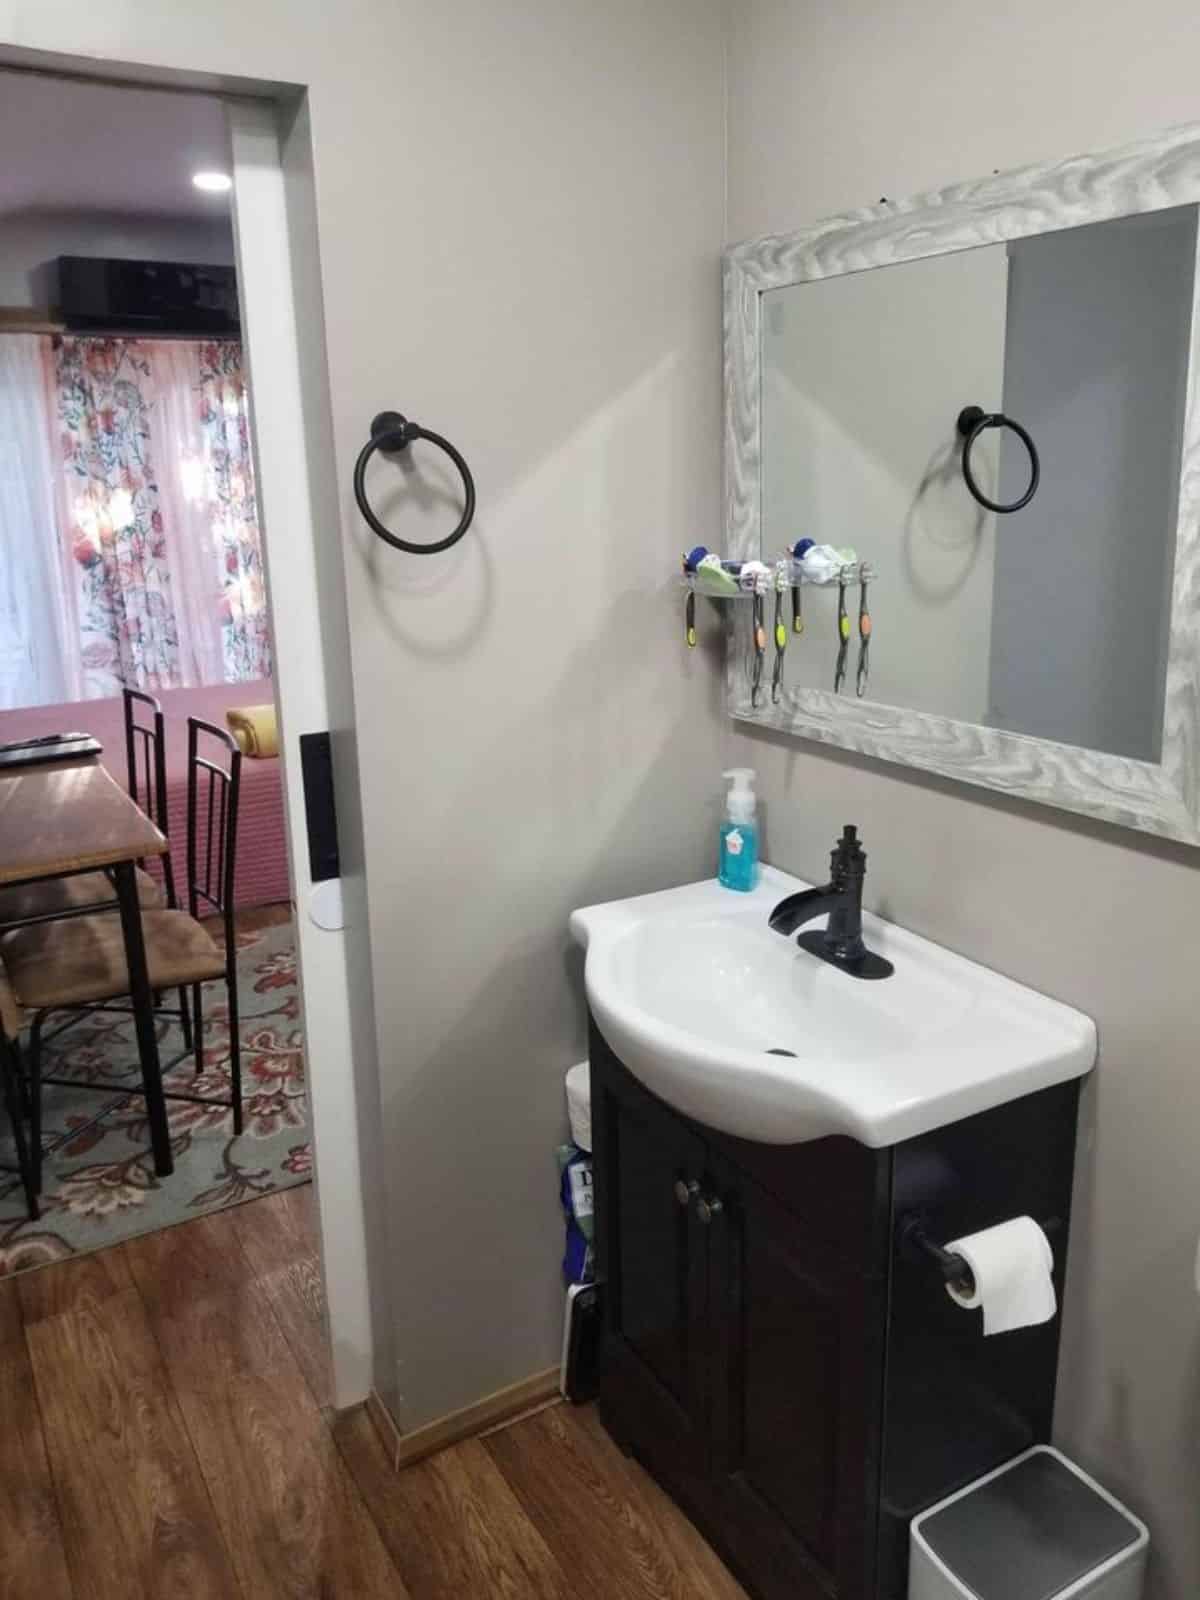 Bathroom area has a sink with vanity & mirror and standard toilet